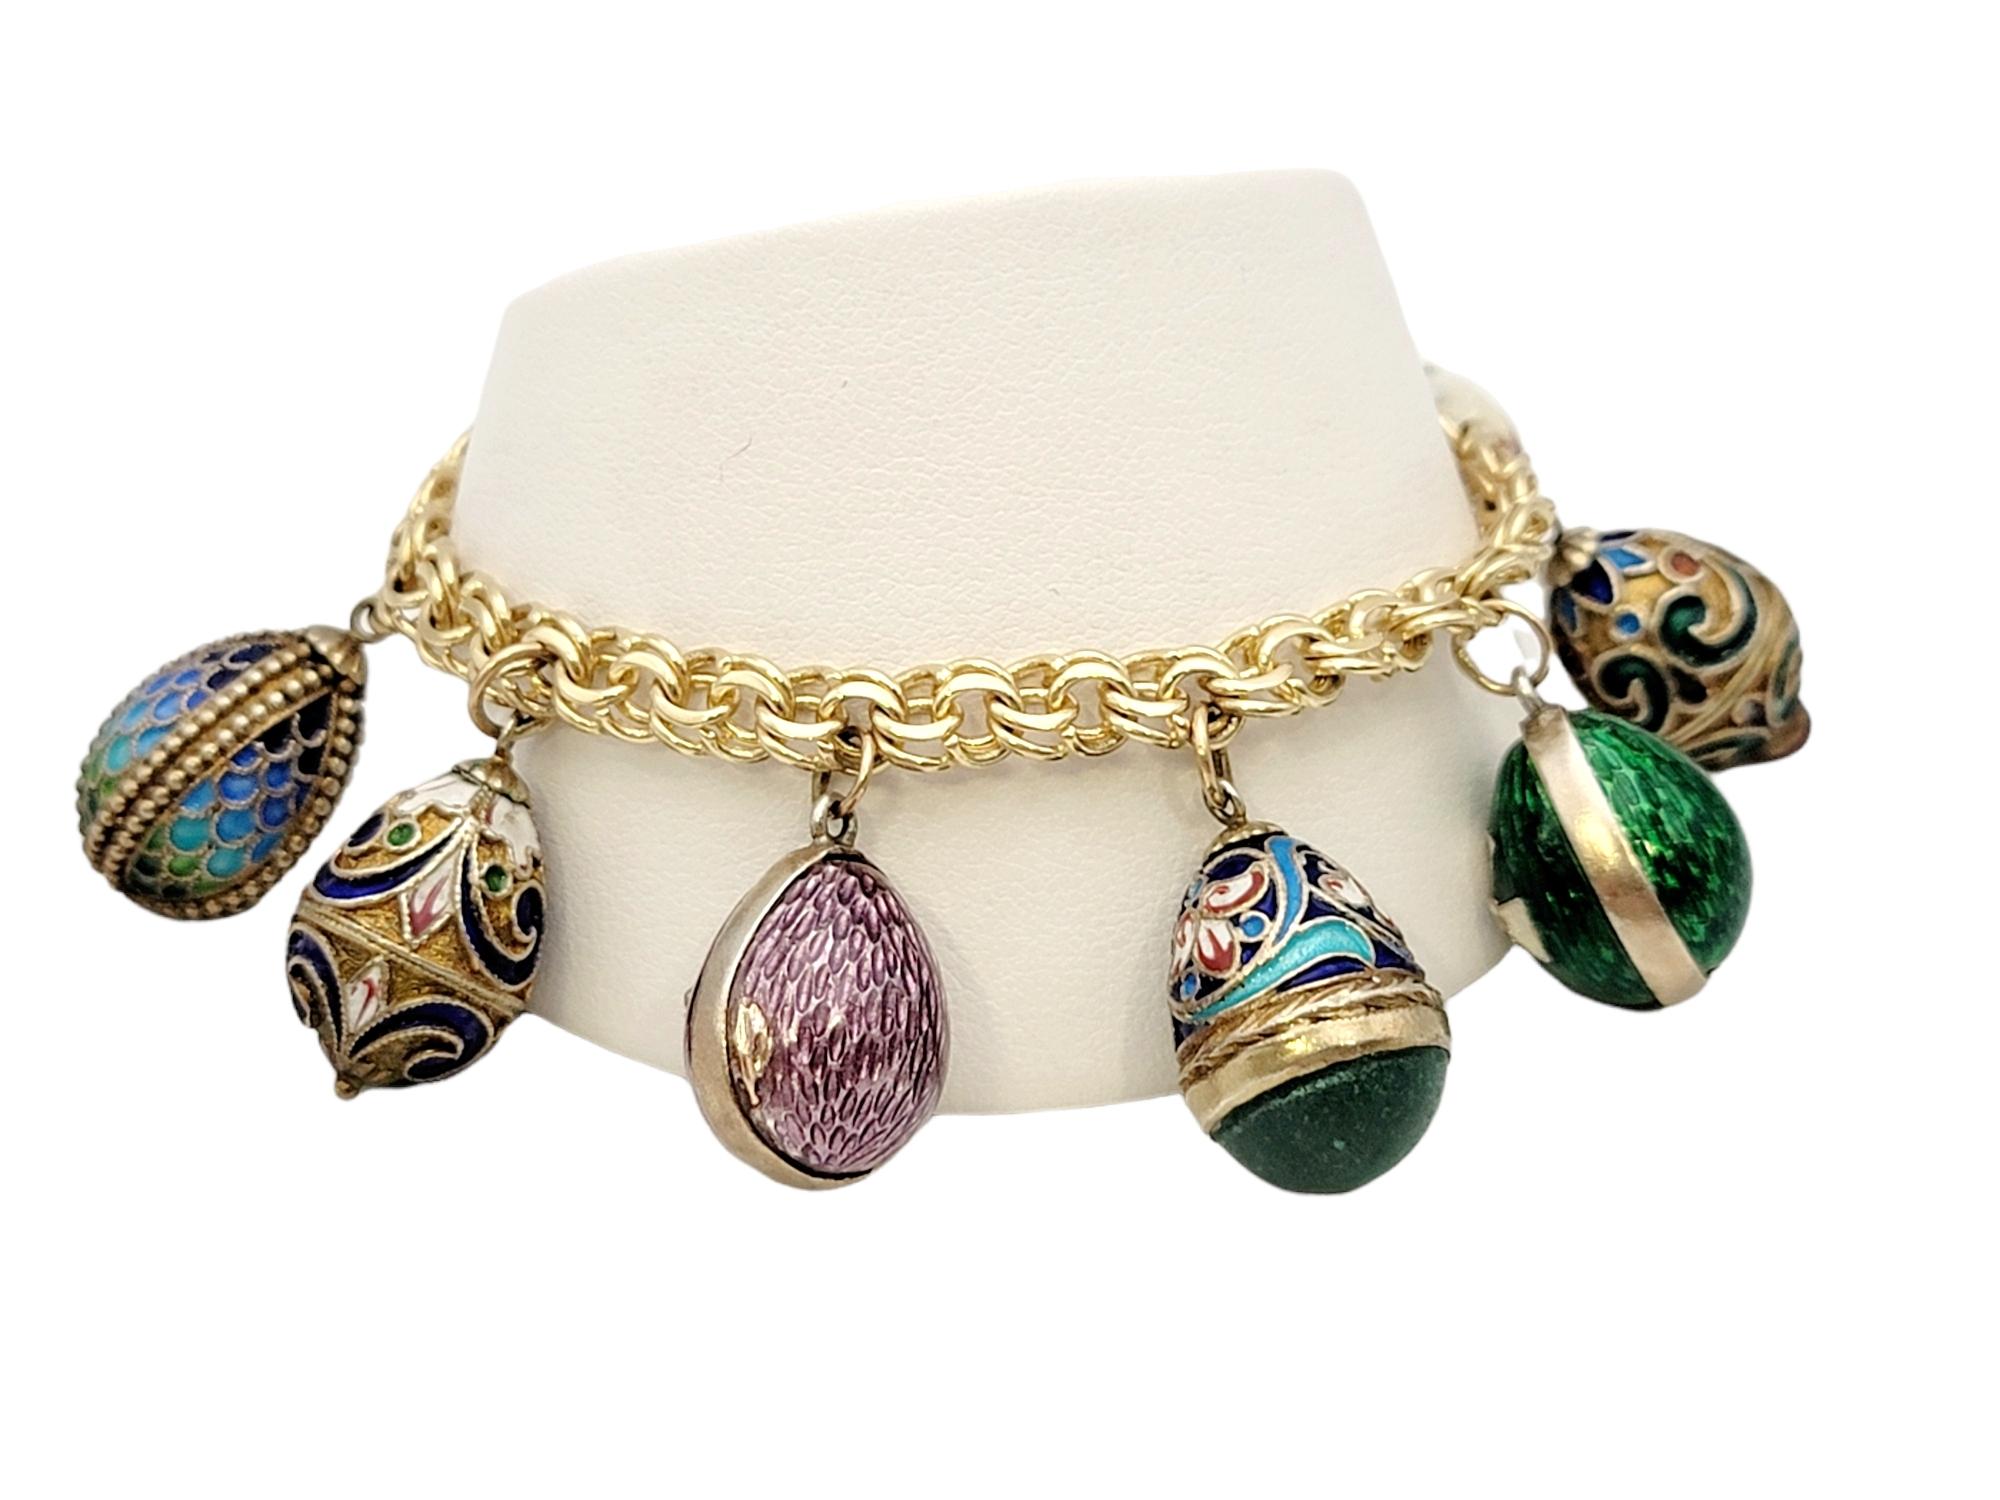 Vintage 14 Karat Yellow Gold Charm Bracelet with 7 Colorful Enamel Egg Charms For Sale 6